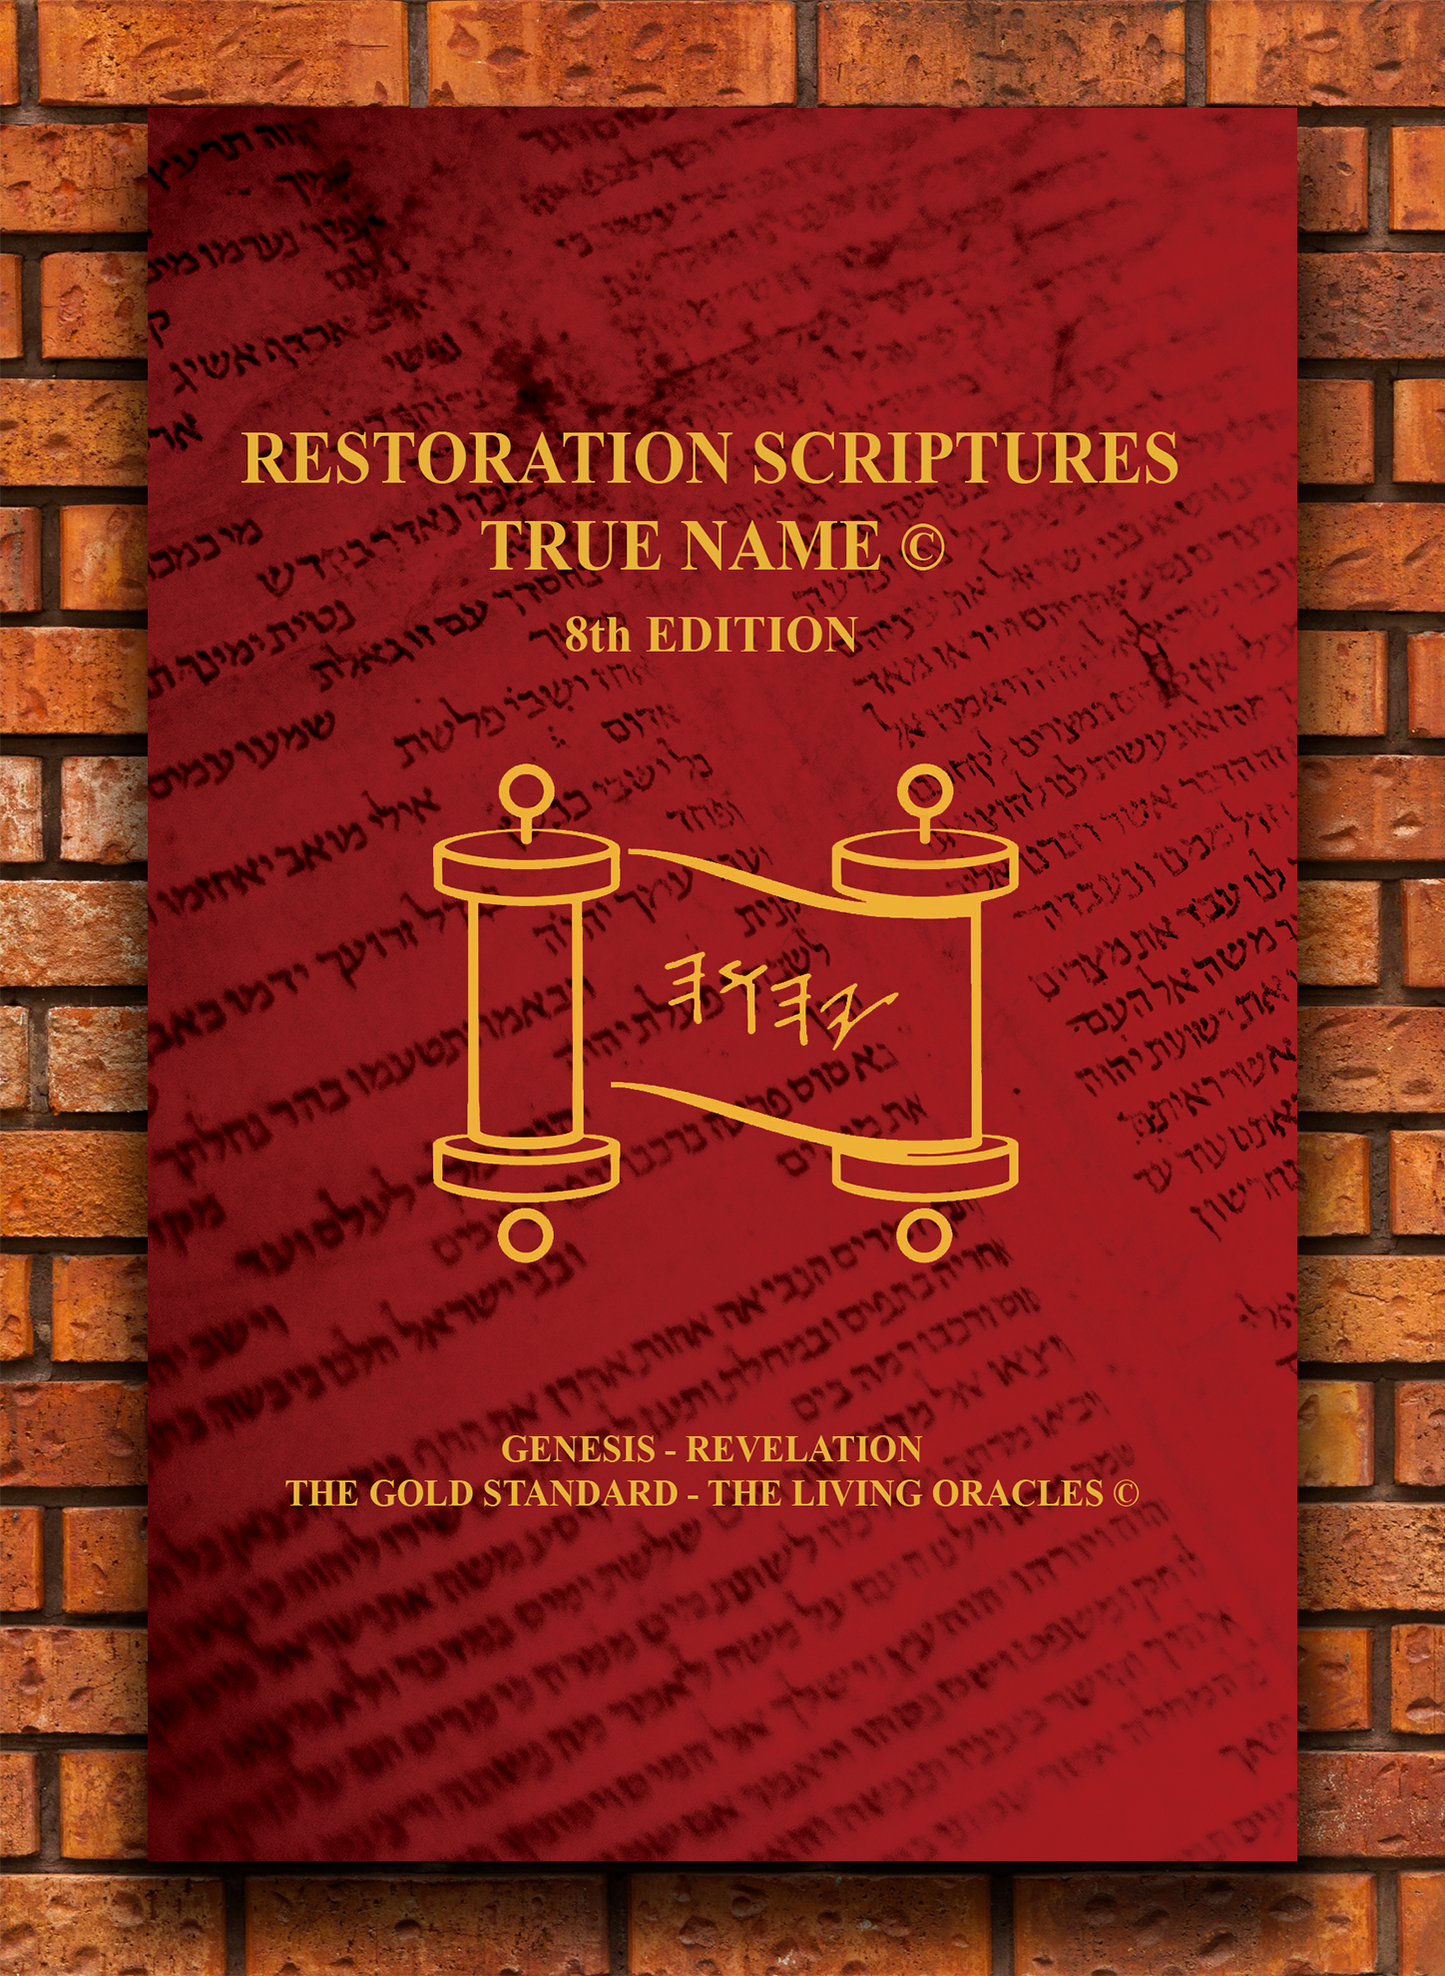 Five Alive Special-The Restoration Scriptures True Name Eighth Edition - Genesis-Revelation